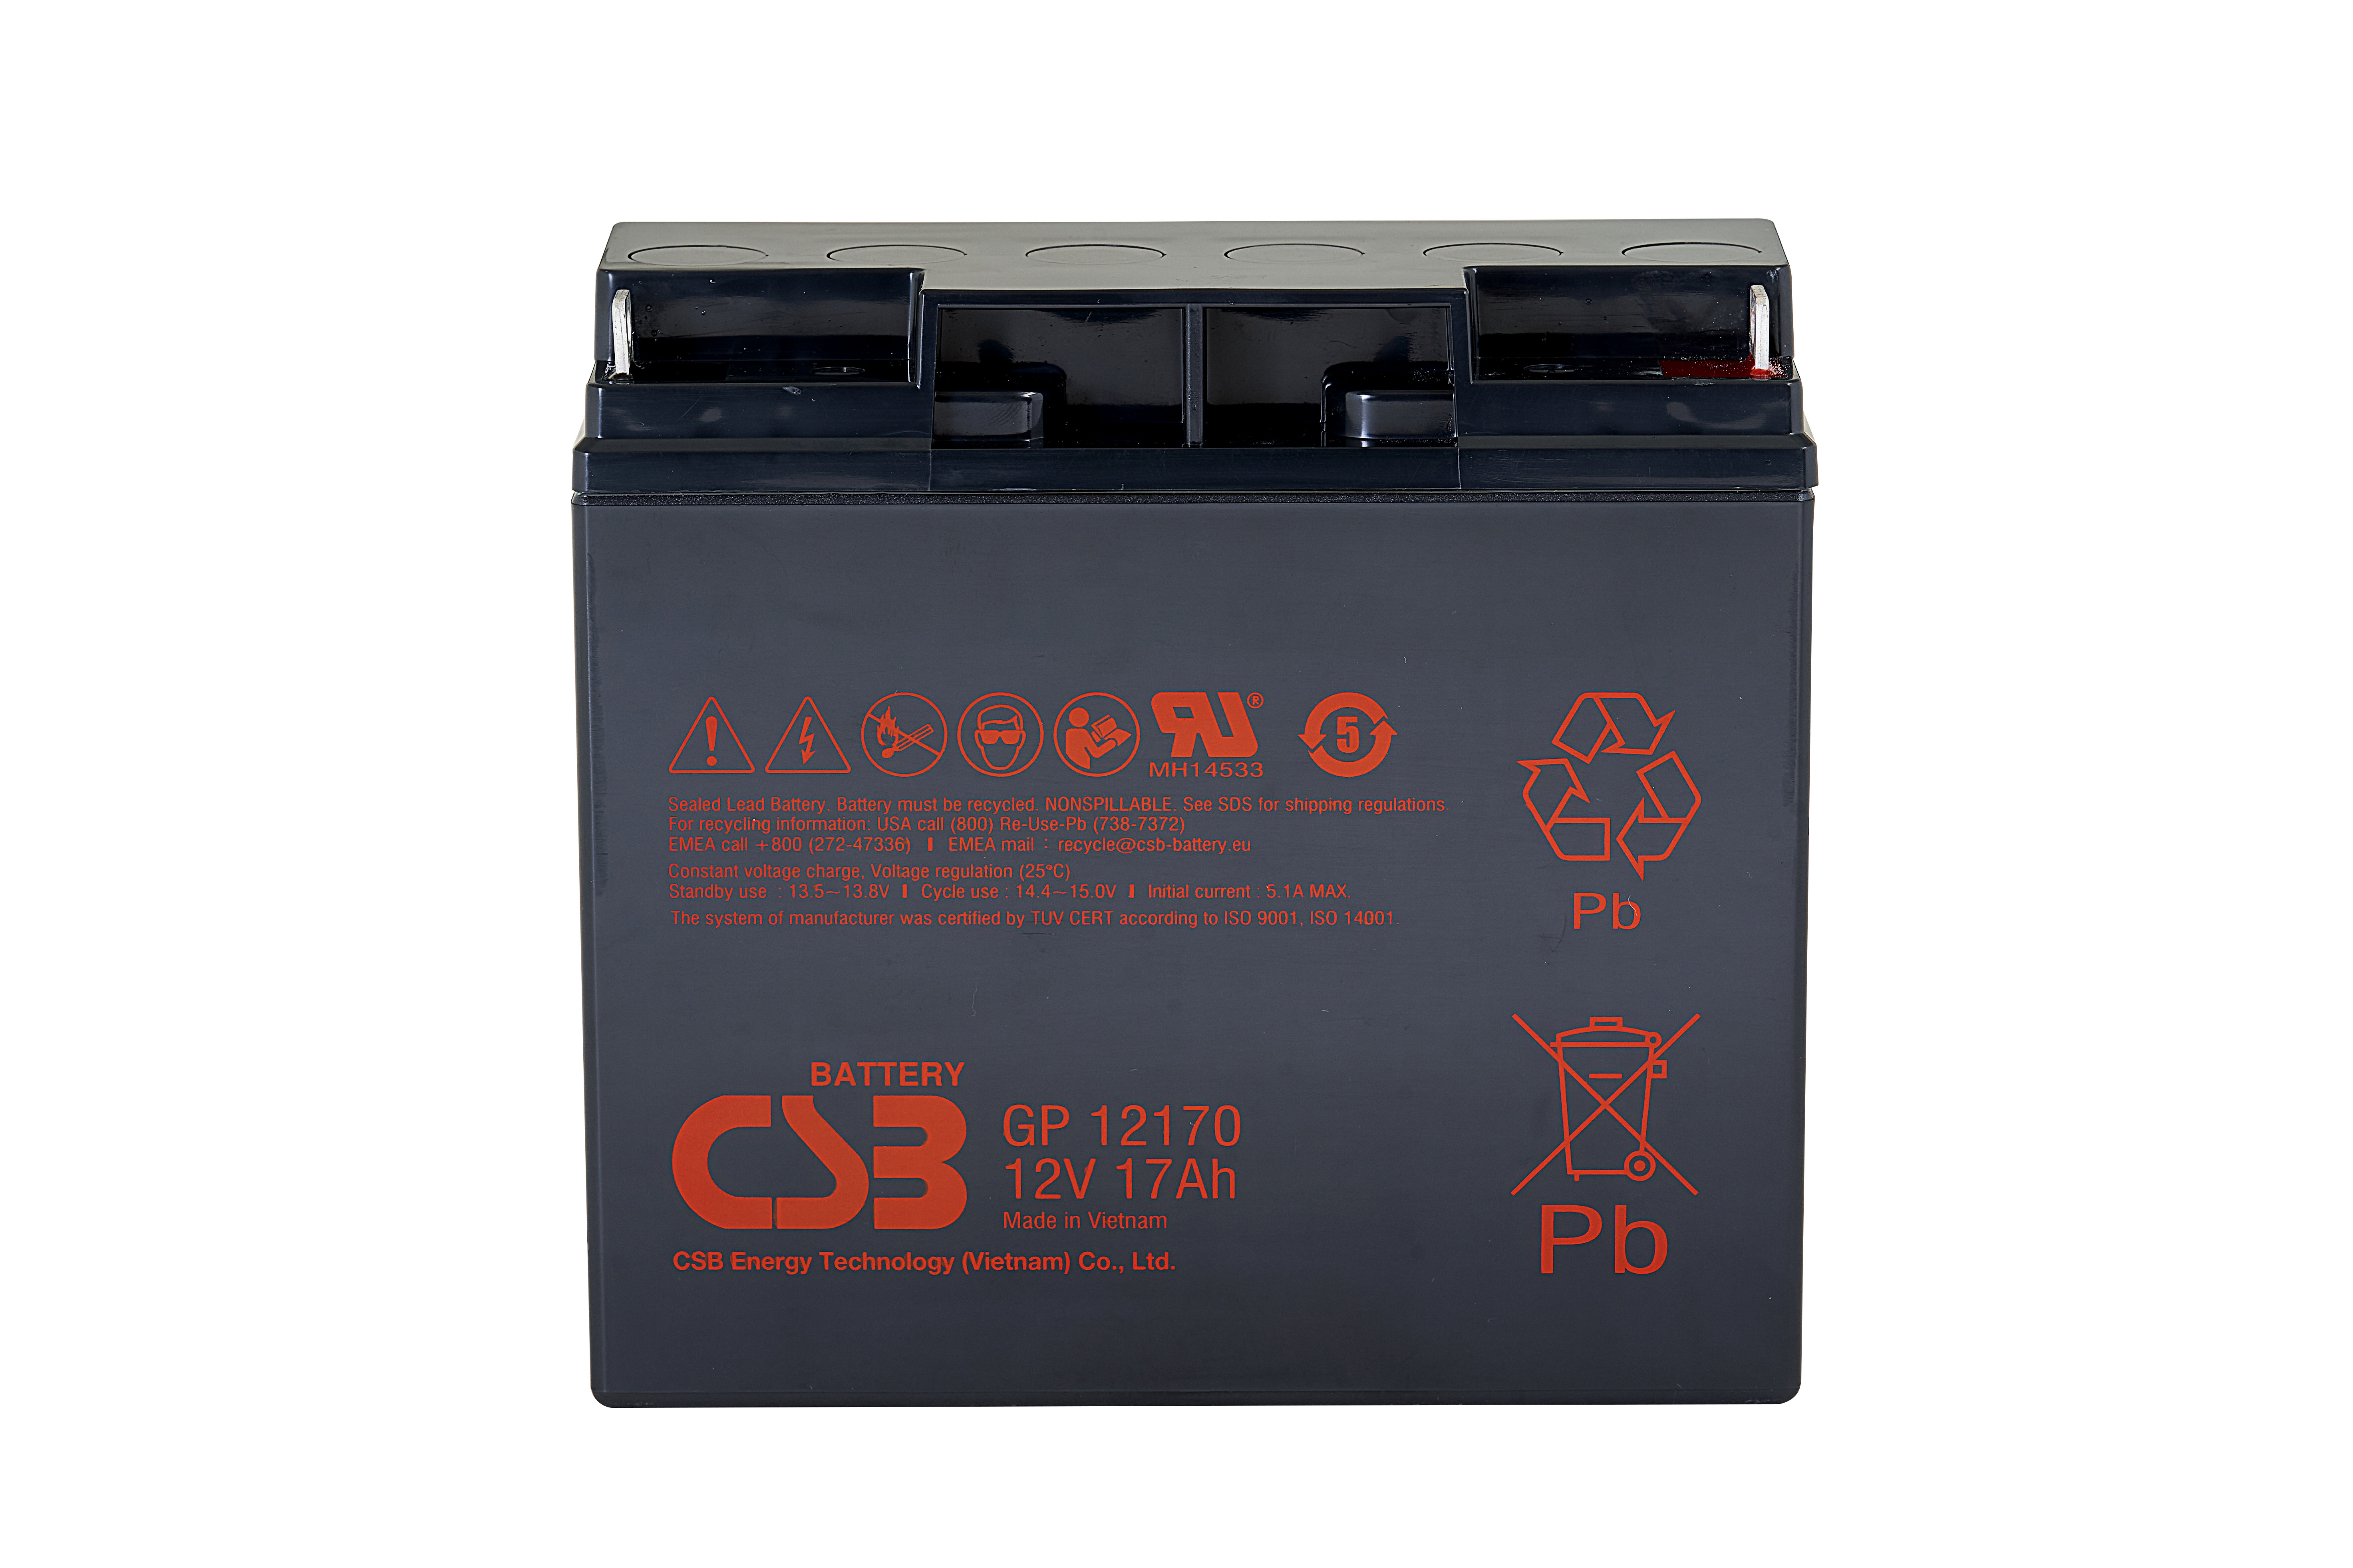 Battery CSB series GP, GP12170 B3, voltage 12V, capacity 17Ah (discharge 20 hours), max. discharge current (5 sec.) 230A, short circuit current 532A, max. charge current 5.1A, lead-acid type AGM, terminals B3, for nut and bolt M6, LxWxH 181x76.2x167mm., weight 5.5kg., service life 5 years.